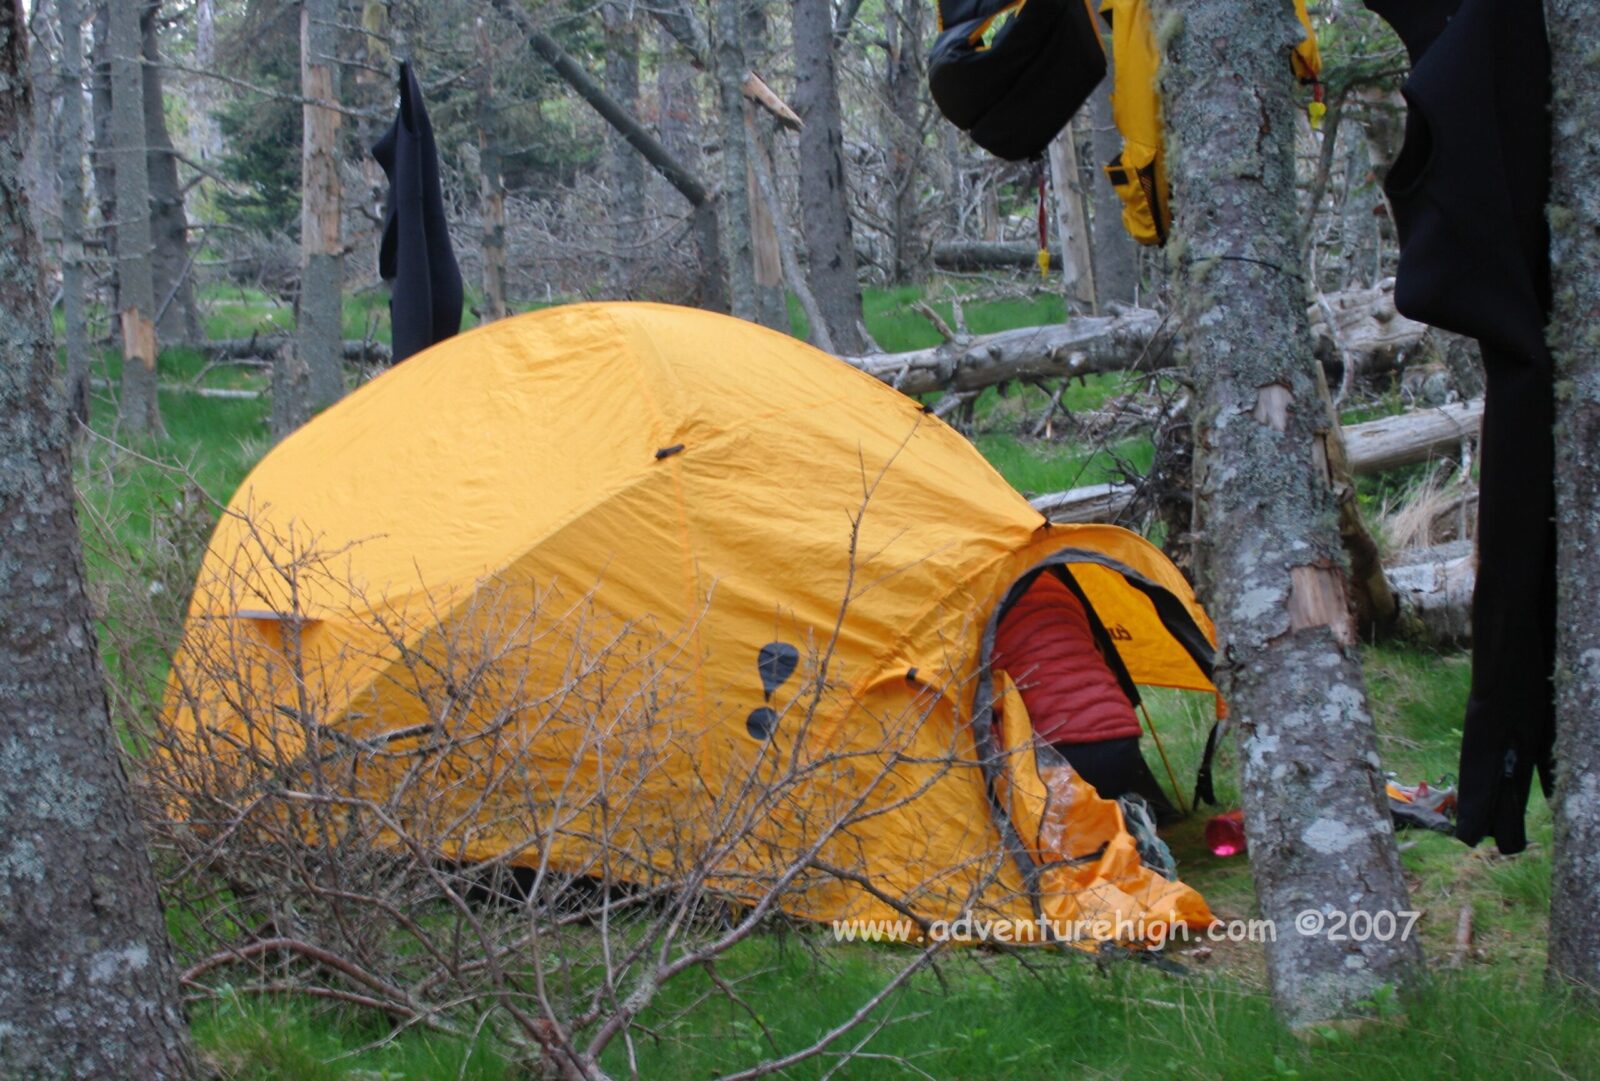 A yellow tent in a wooded area.